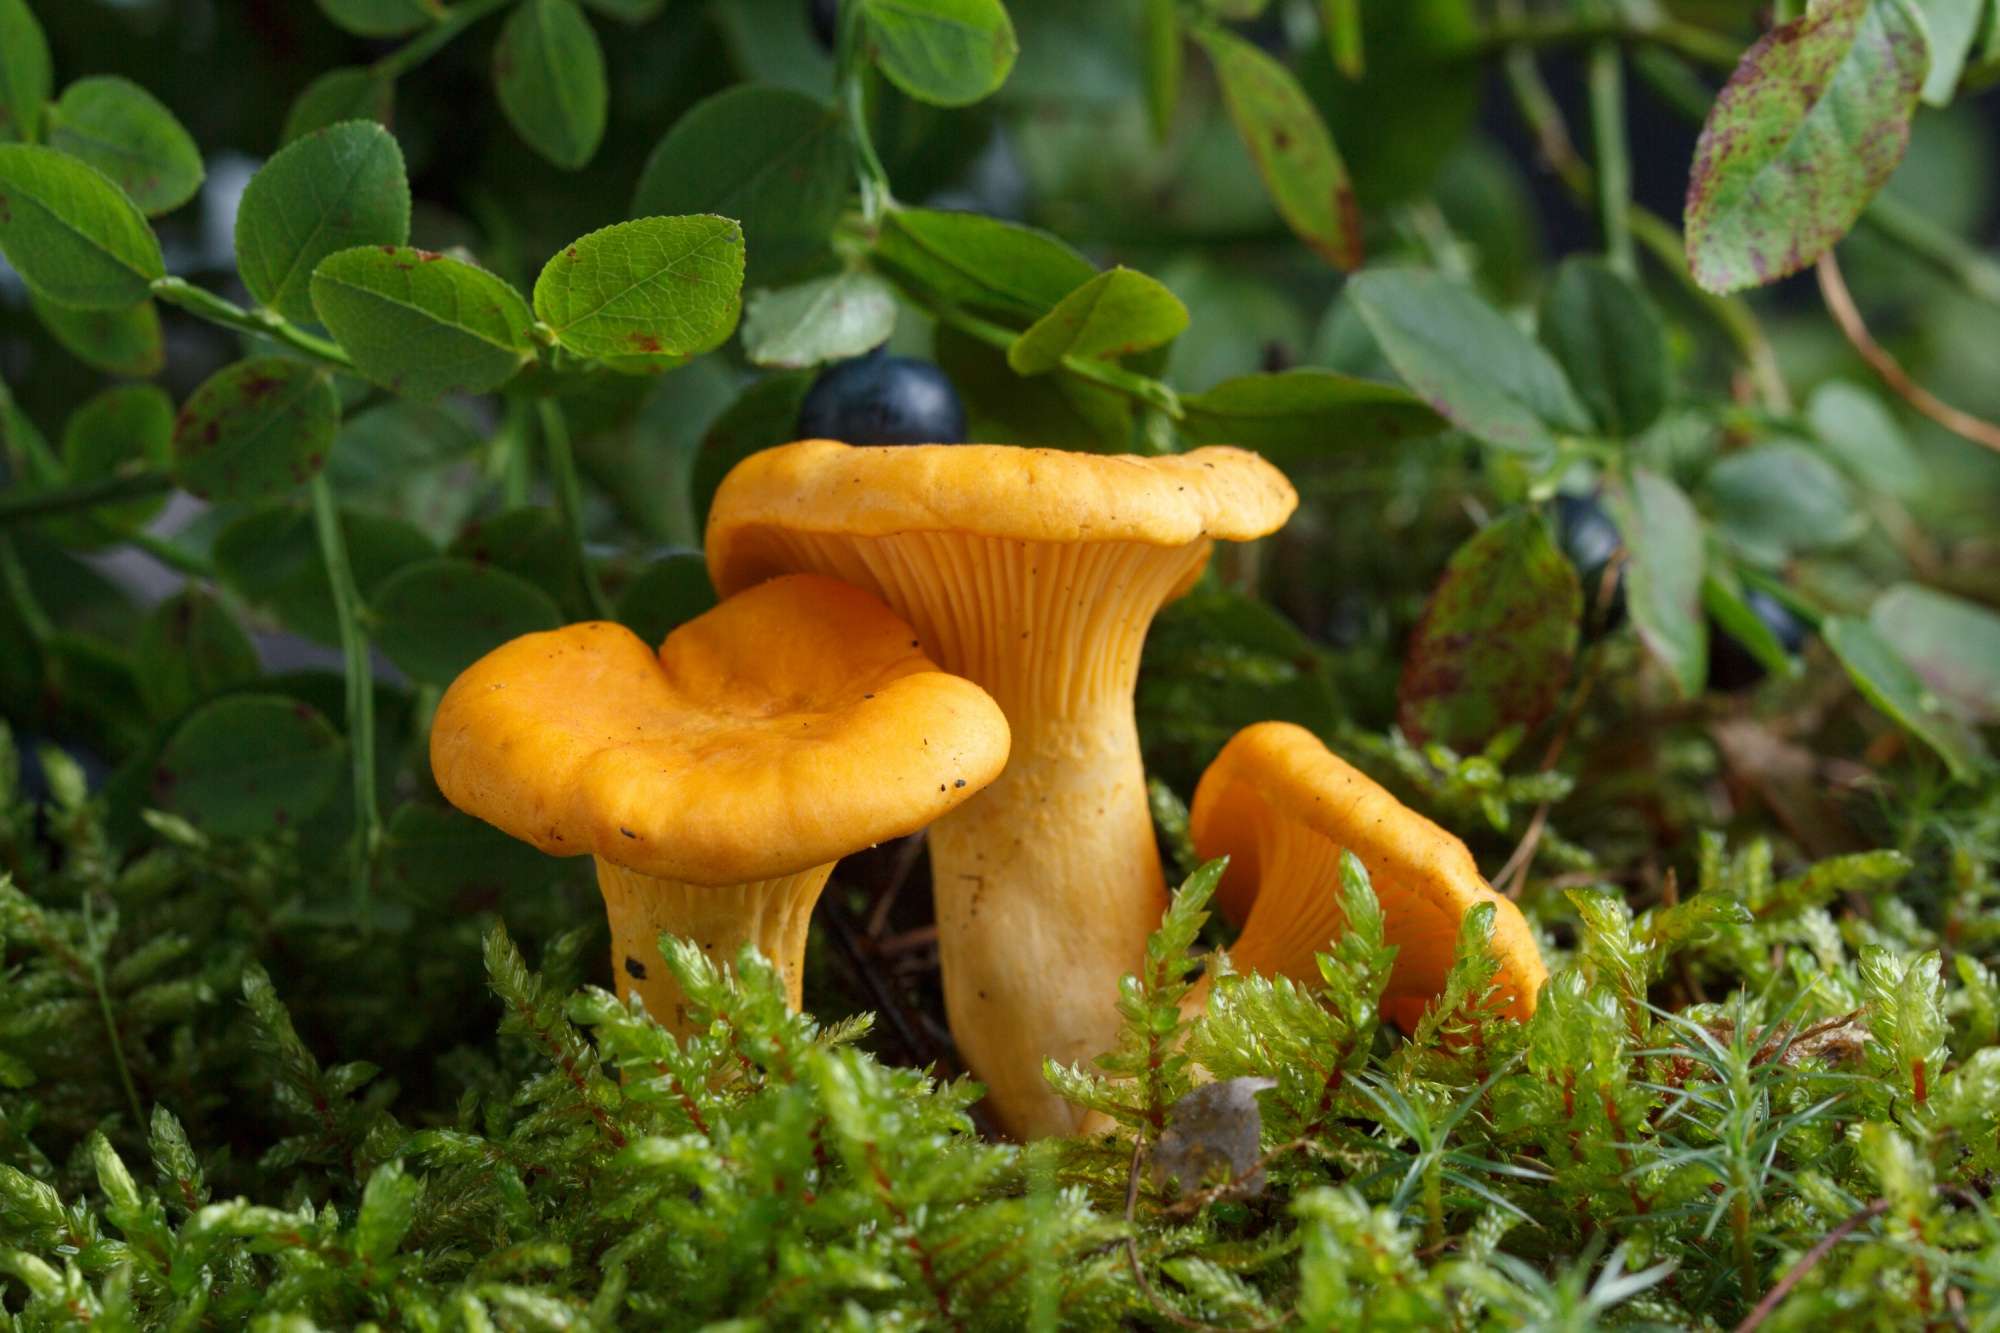 Collecting chanterelle mushroom in the forest. chanterelle in moss with green background.